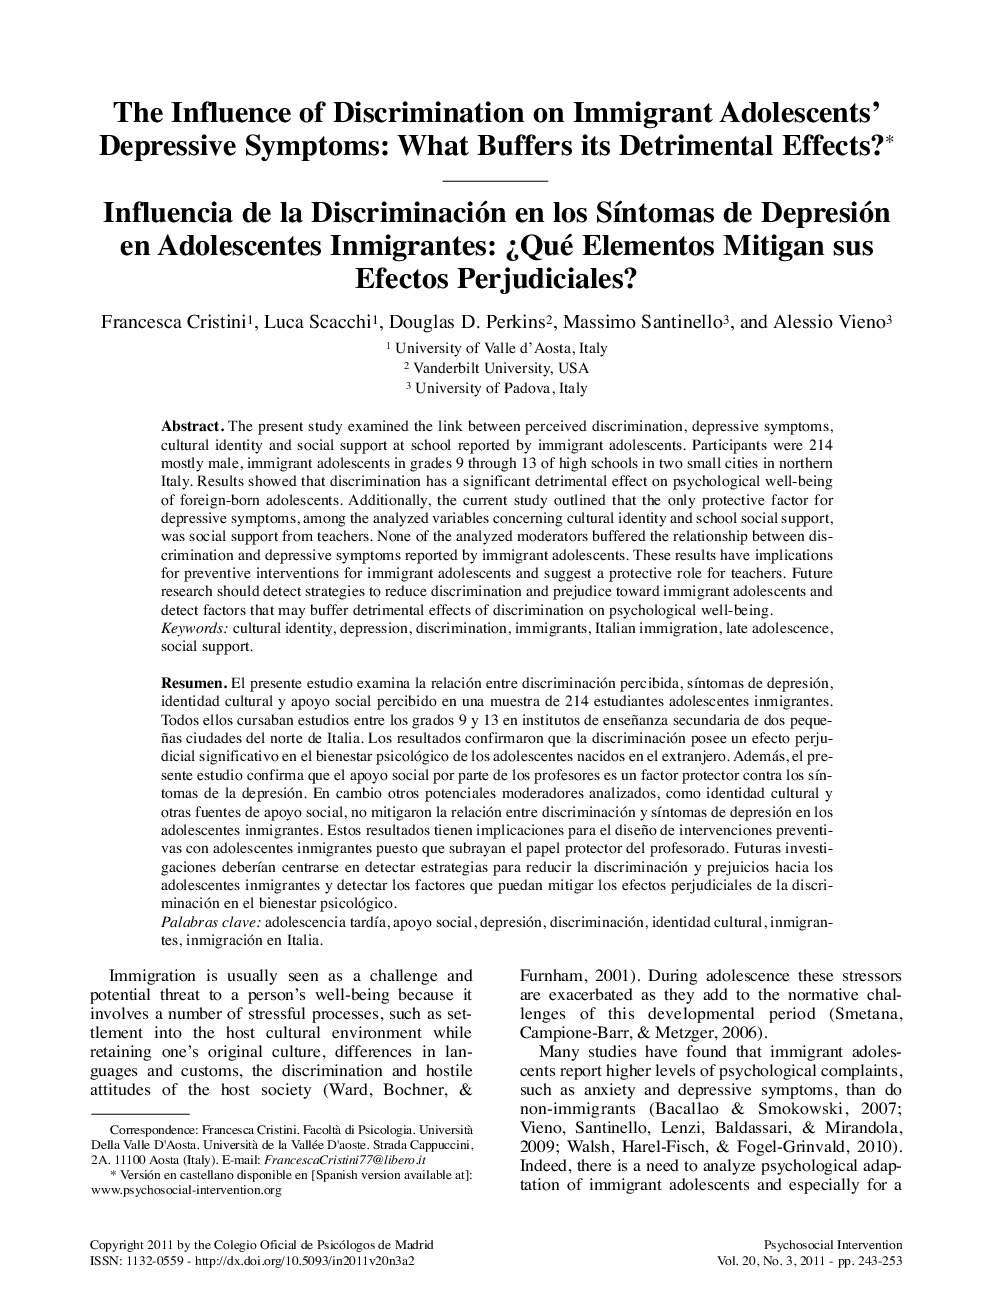 The Influence of Discrimination on Immigrant Adolescents’ Depressive Symptoms: What Buffers its Detrimental Effects? *